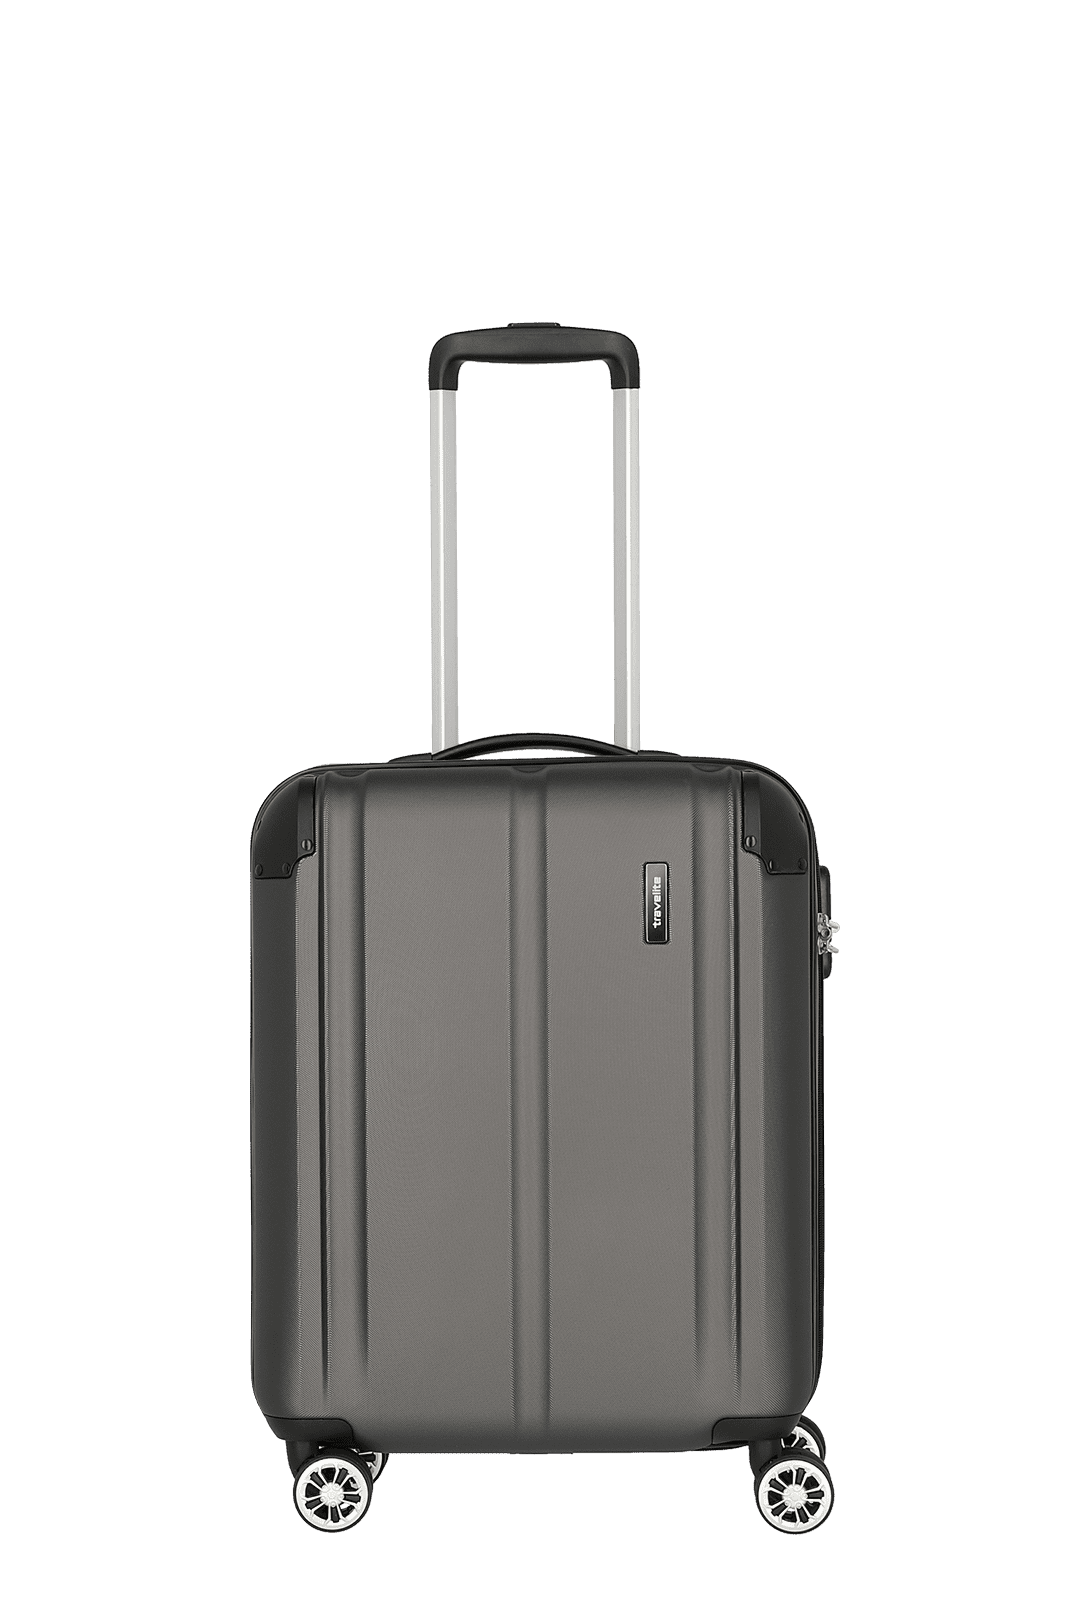 City suitcase hard (55cm) color green - travelite in shell S size